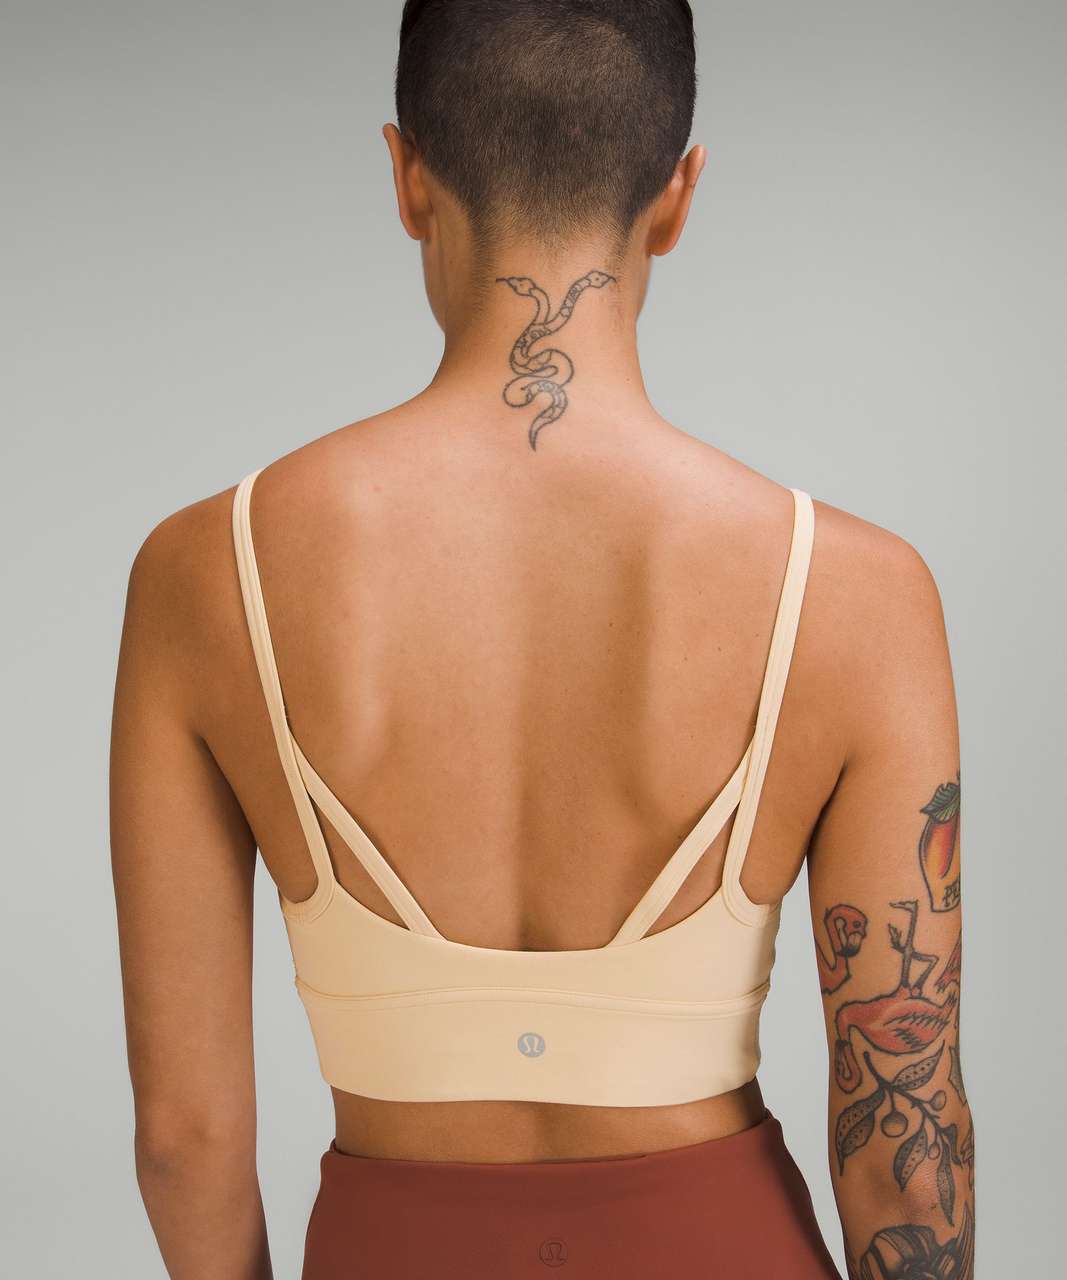 Lululemon Nulu Front-Gather Yoga Bra *Light Support, B/C Cup - Prosecco